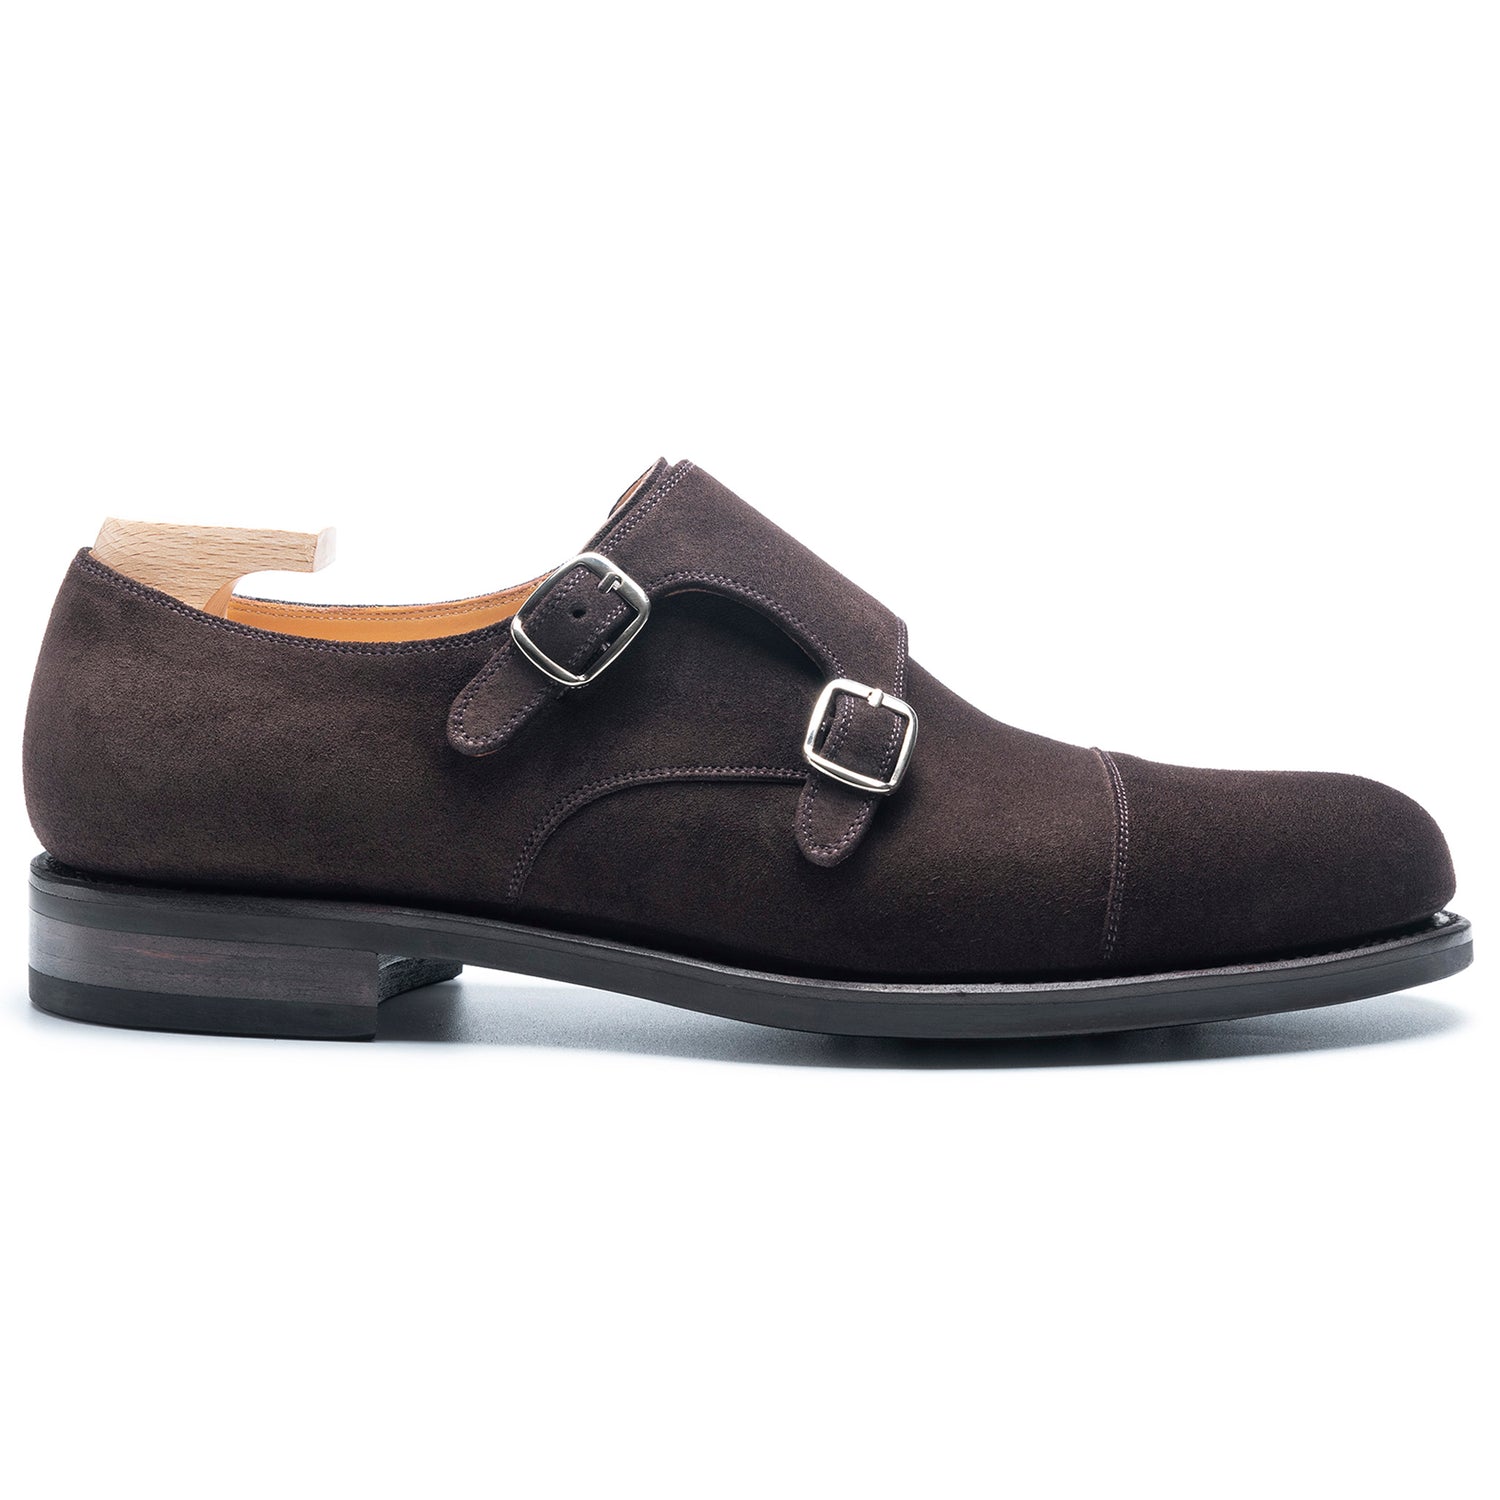 TLB Mallorca leather shoes 690 / MADISON / ANTE BROWN